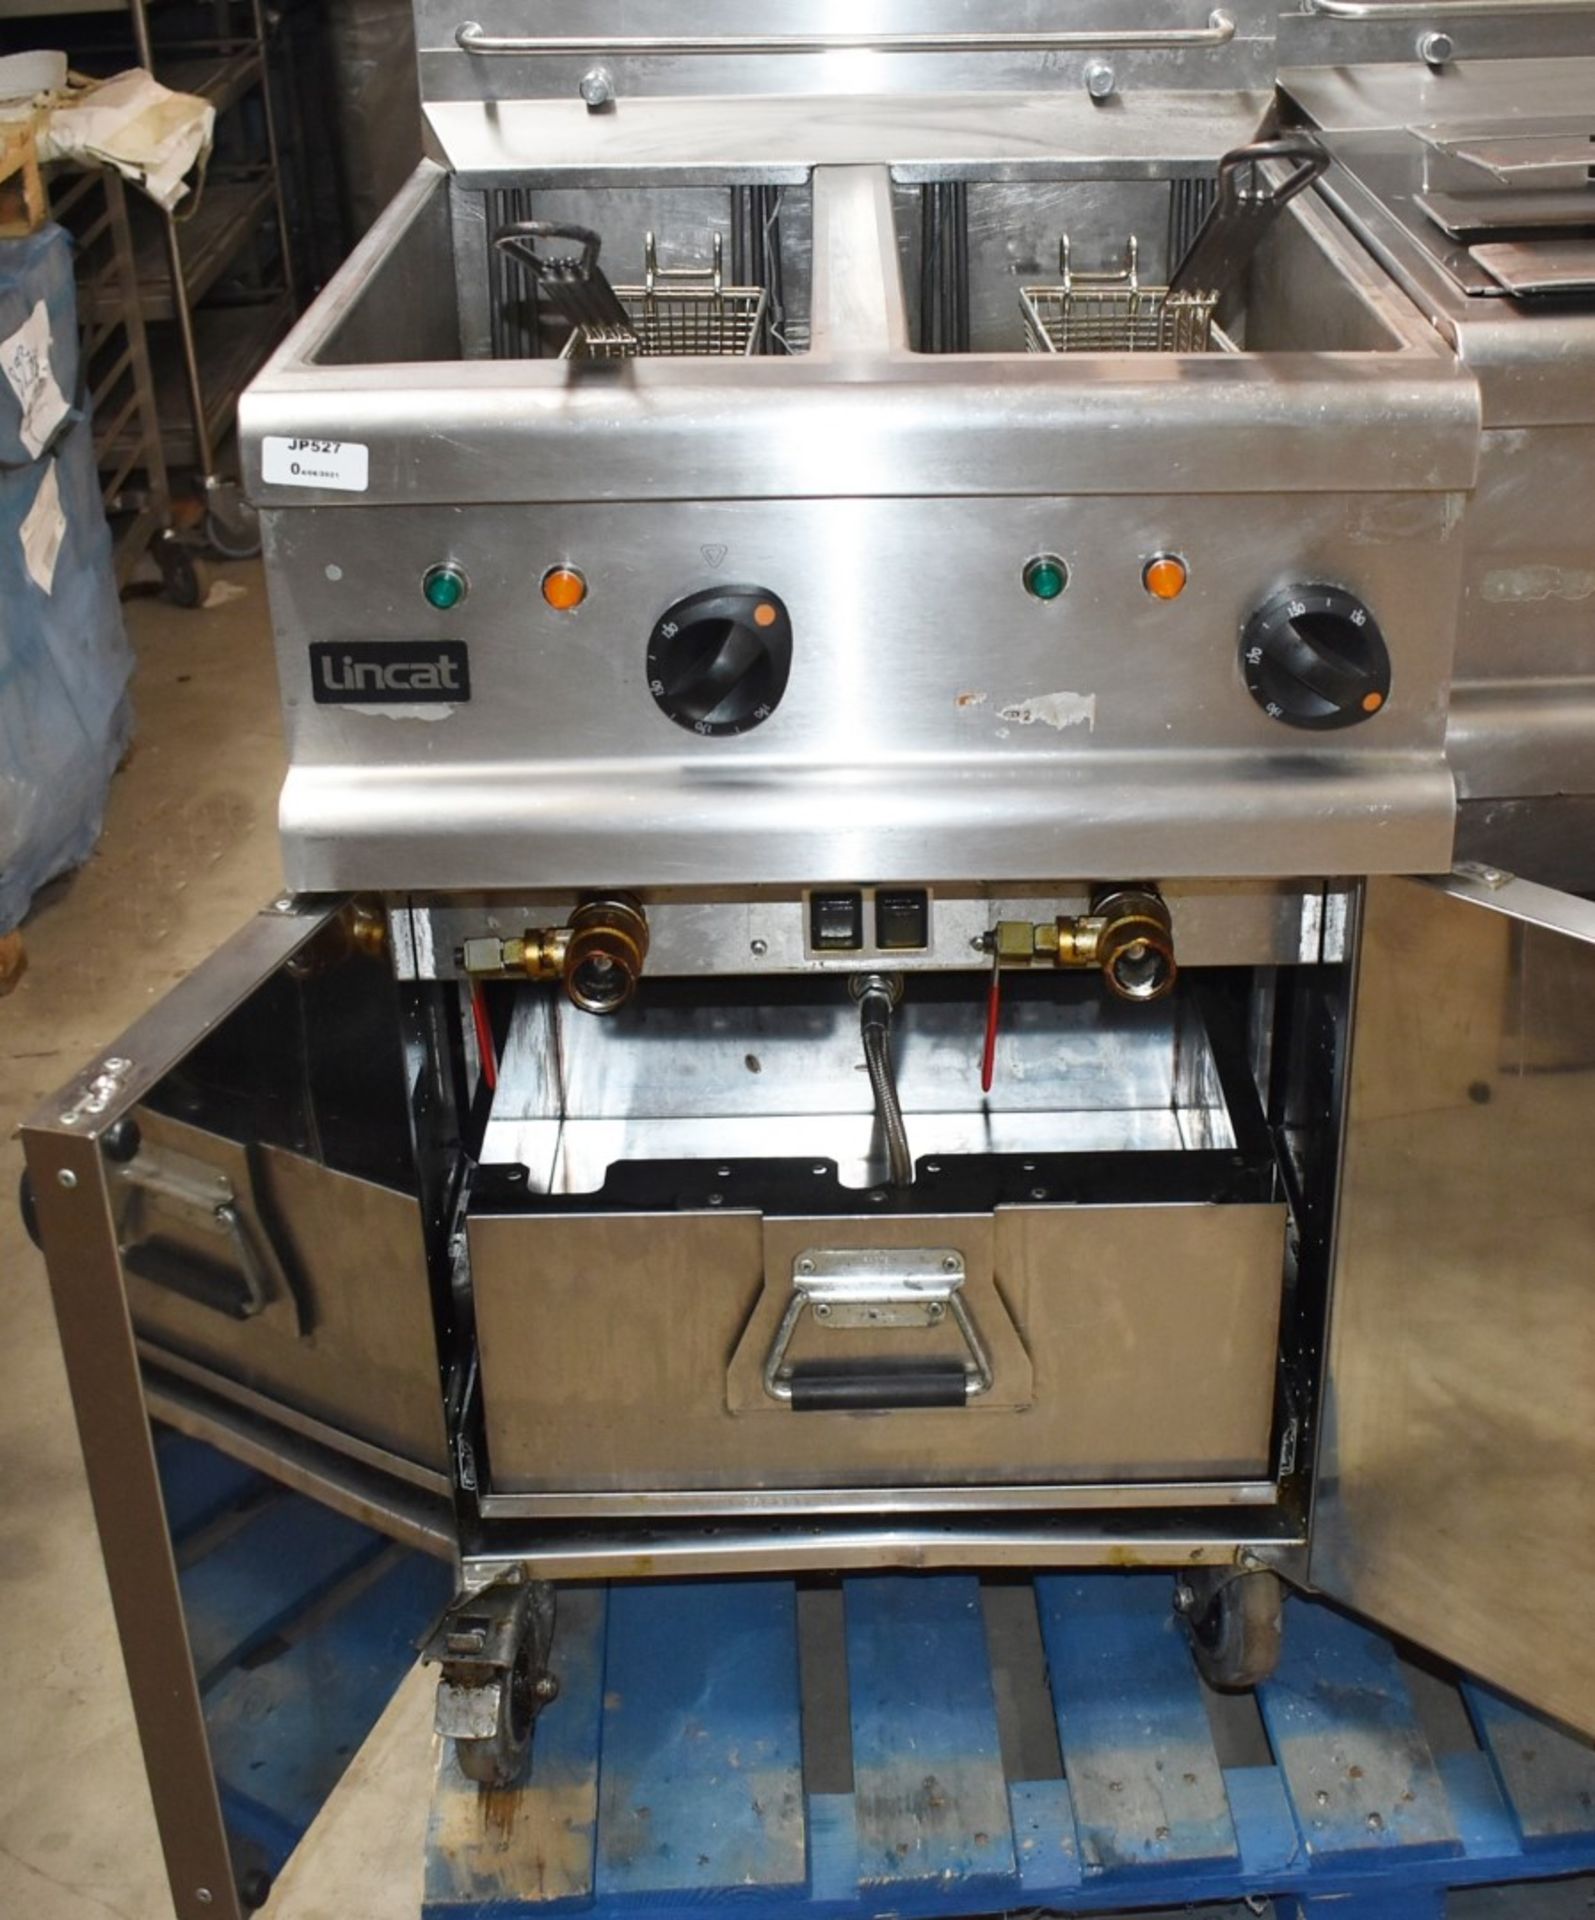 1 x Lincat Opus 700 OE7113 Single Large Tank Electric Fryer With Built In Filteration - 240V / 3PH P - Image 9 of 14